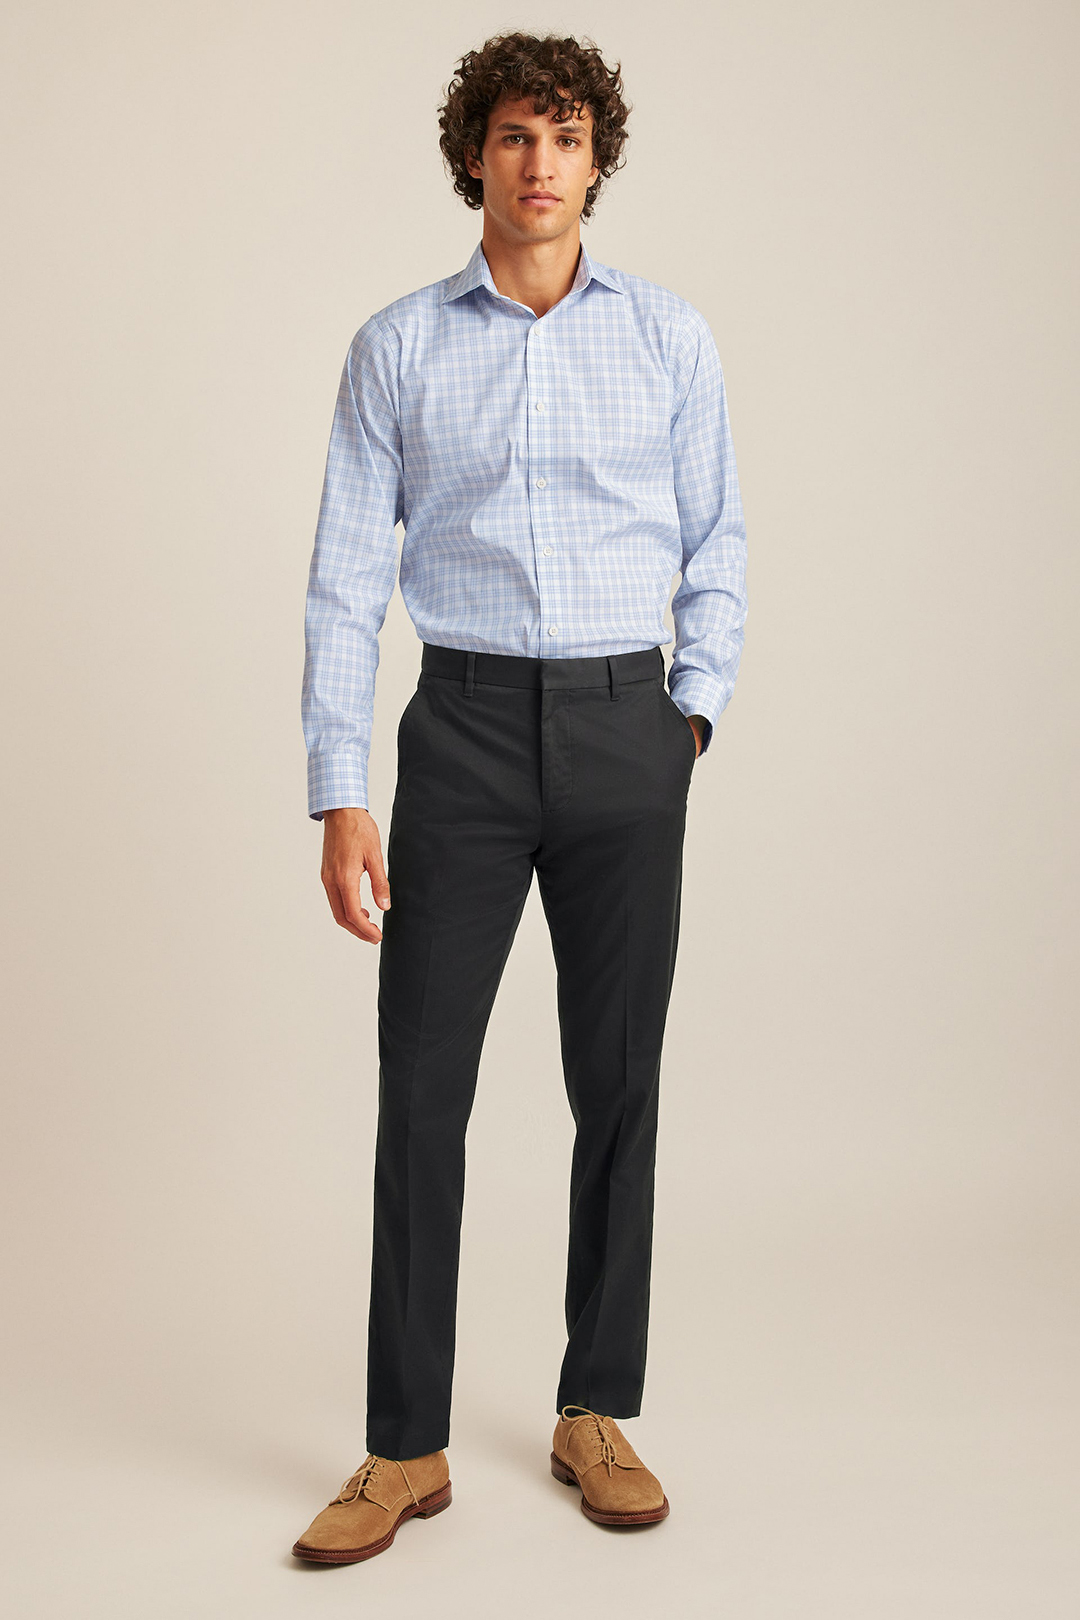 Blue dress shirt, black dress pants, and light brown derby shoes outfit